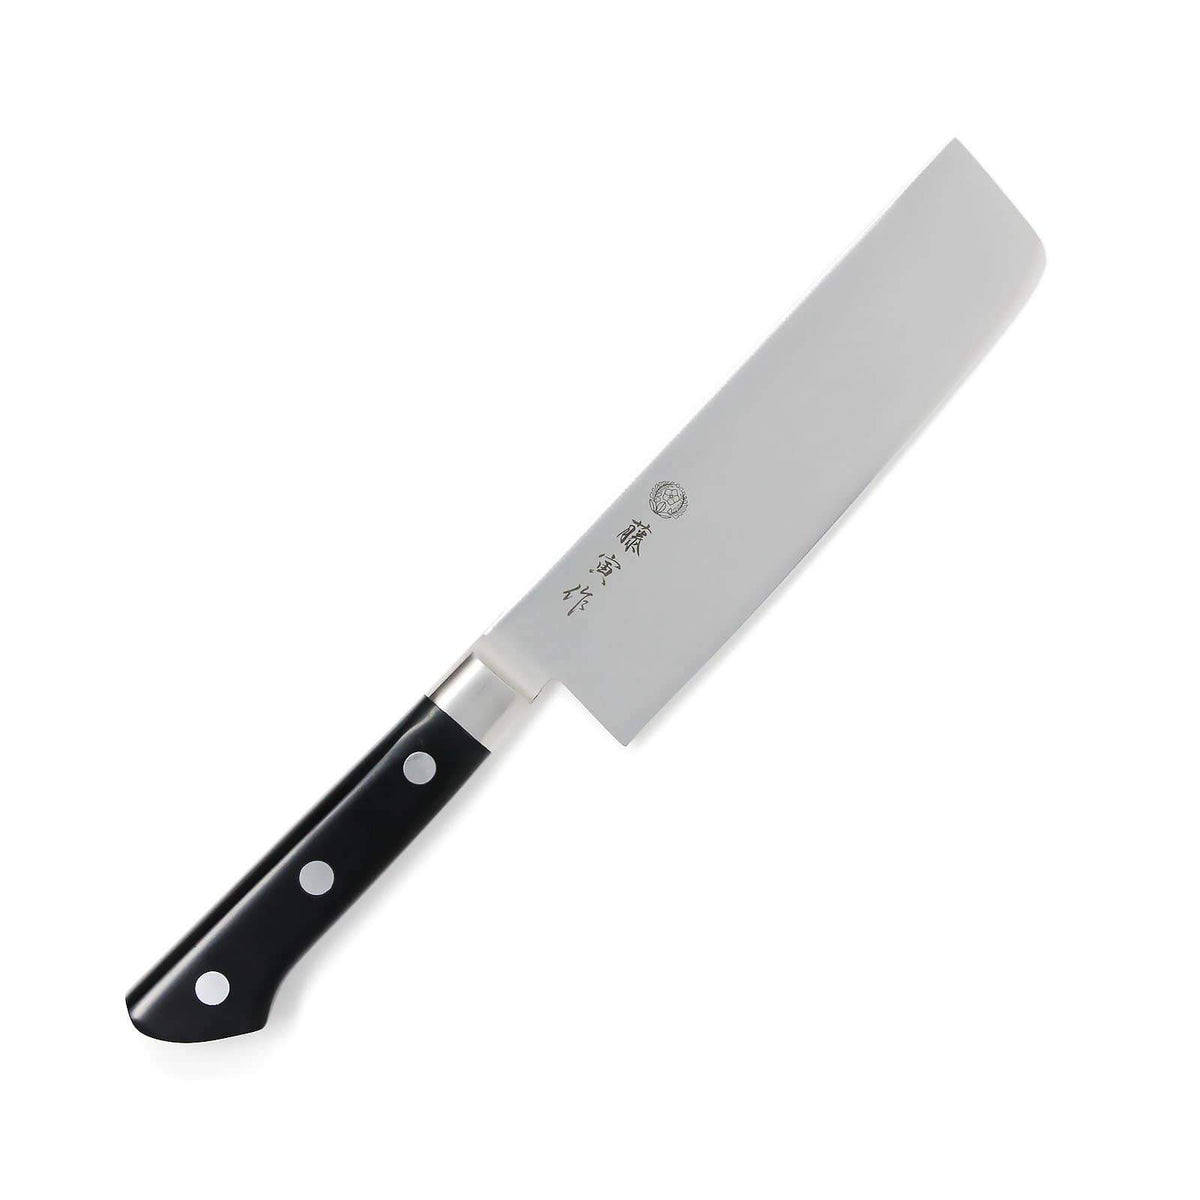 equipment - How heavy should a Chinese chef's knife be? - Seasoned Advice